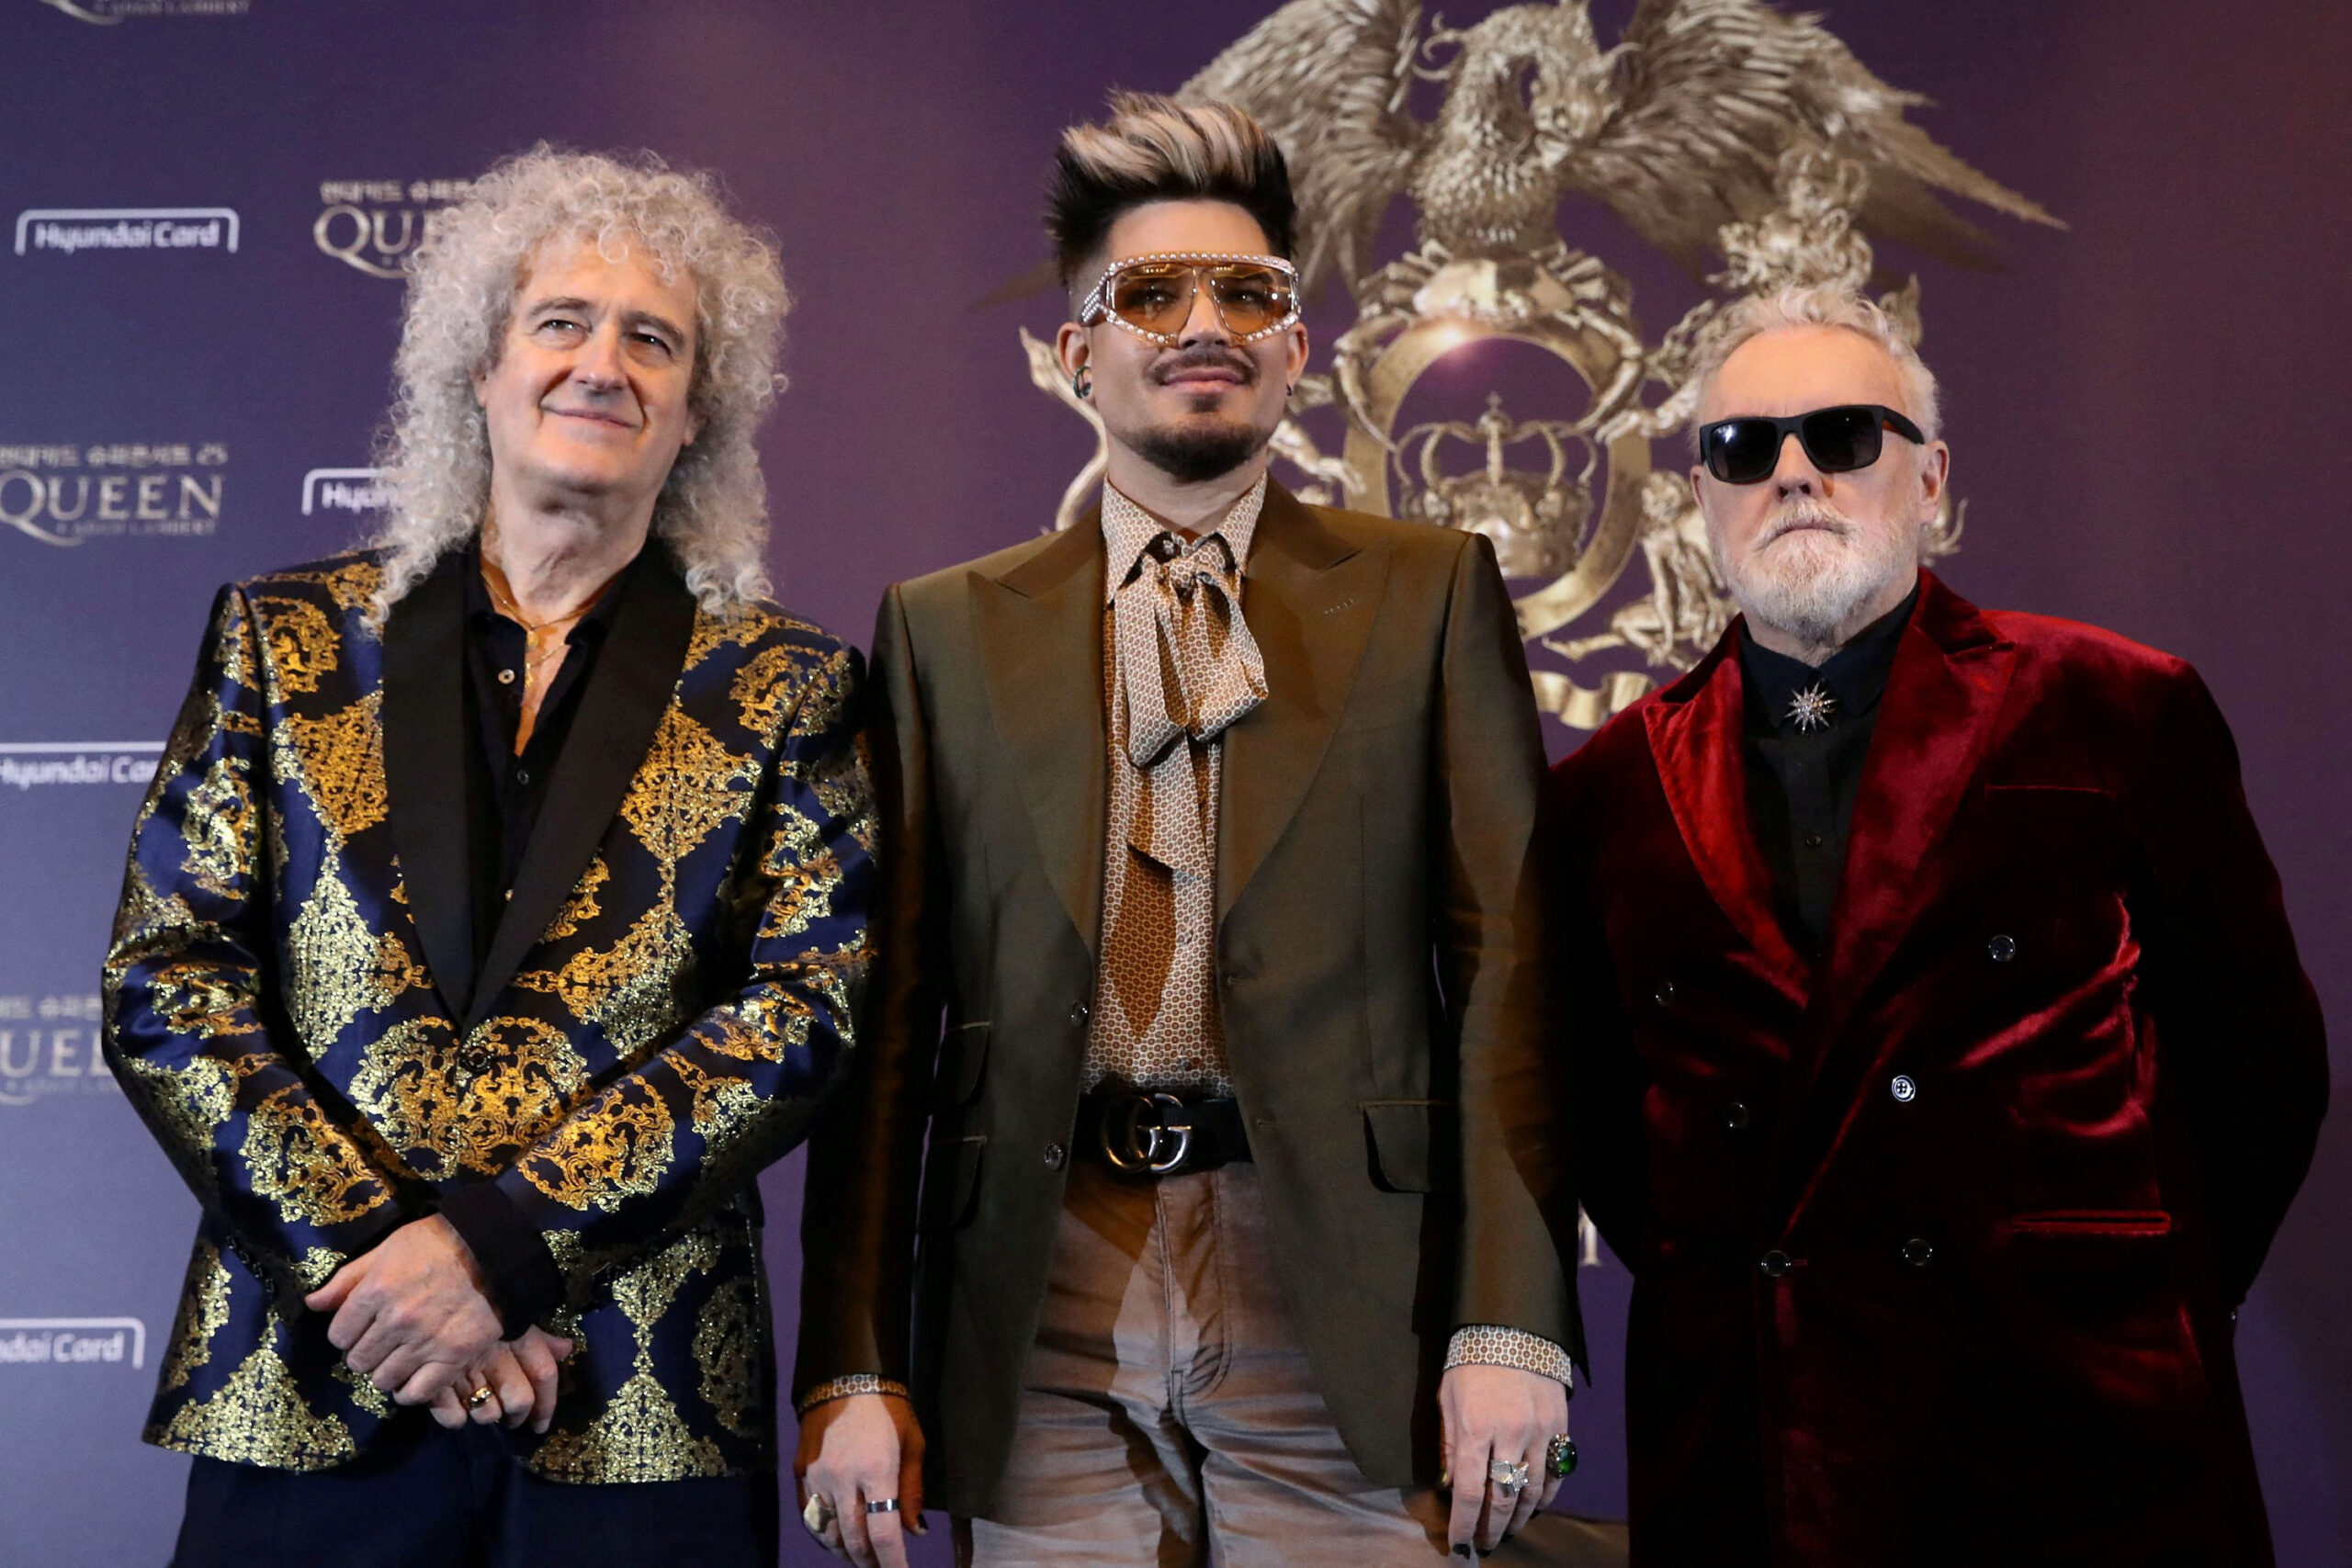 FILE PHOTO: Brian May, Adam Lambert and Roger Taylor of Queen attend a news conference ahead of the Rhapsody Tour at the Conrad Hotel in Seoul, South Korea, January 16, 2020. Chung Sung-Jun/Pool via REUTERS